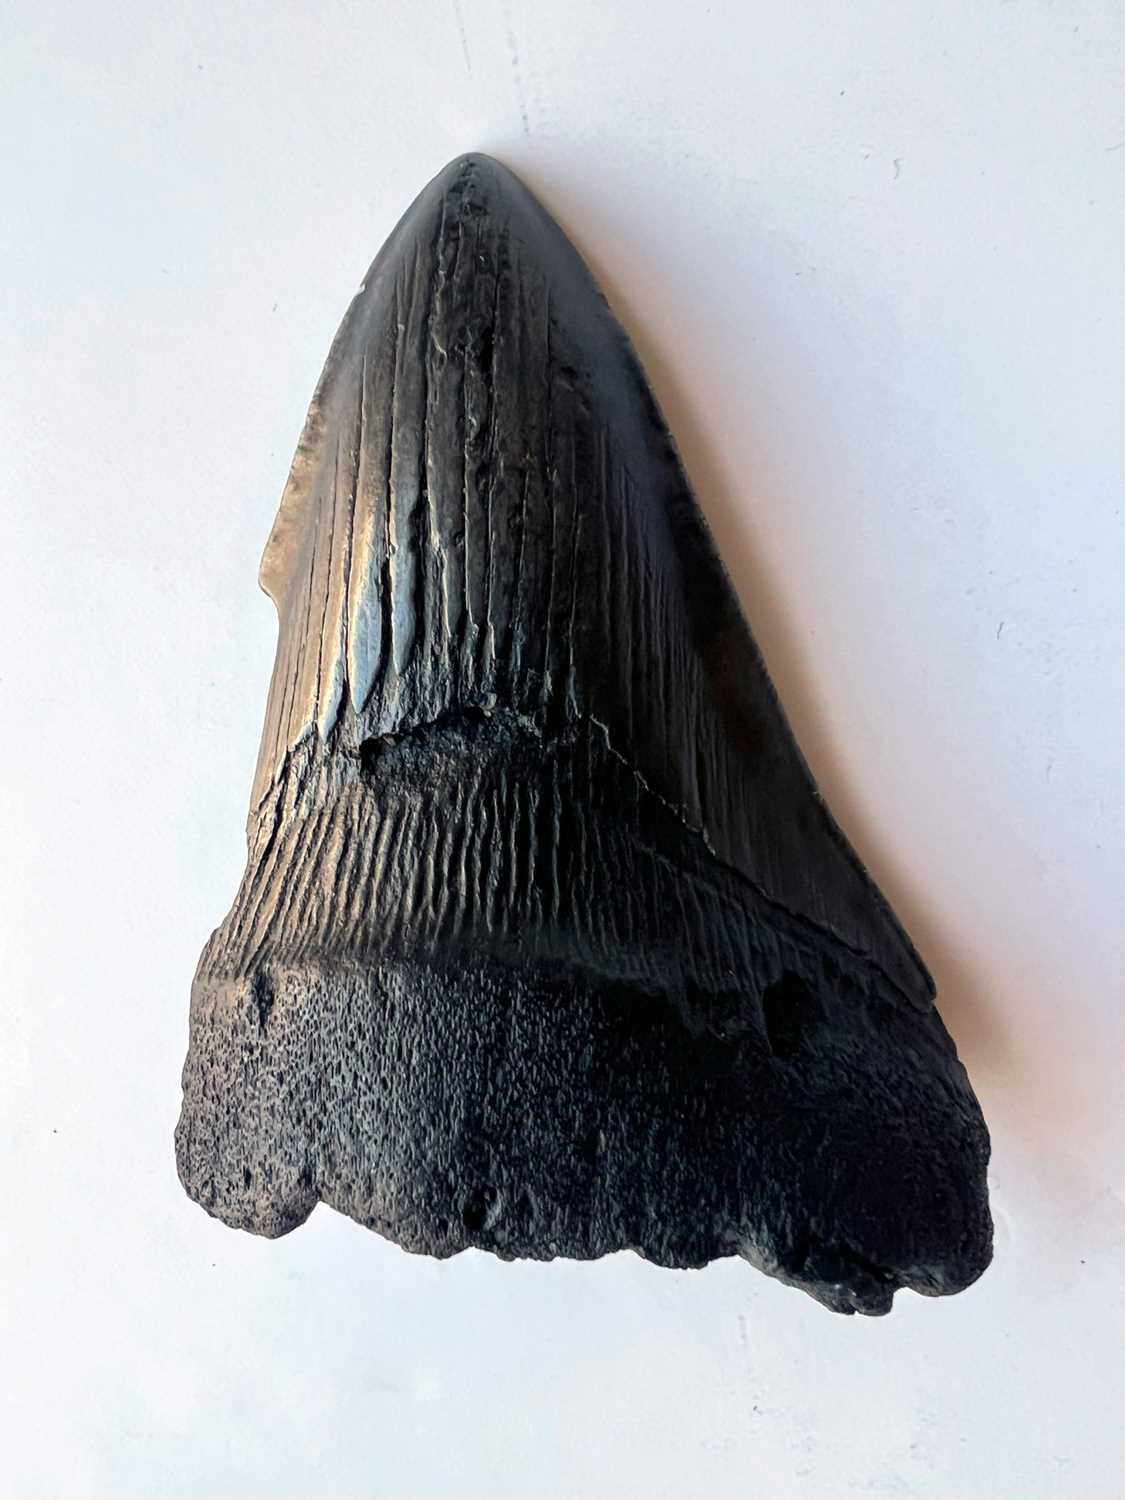 AN EXTINCT ‘MEGALODON’ SHARK TOOTH, MIOCENE-PLIOCENE (3.6 TO 23 MILLTION YEARS OLD) - Image 7 of 7